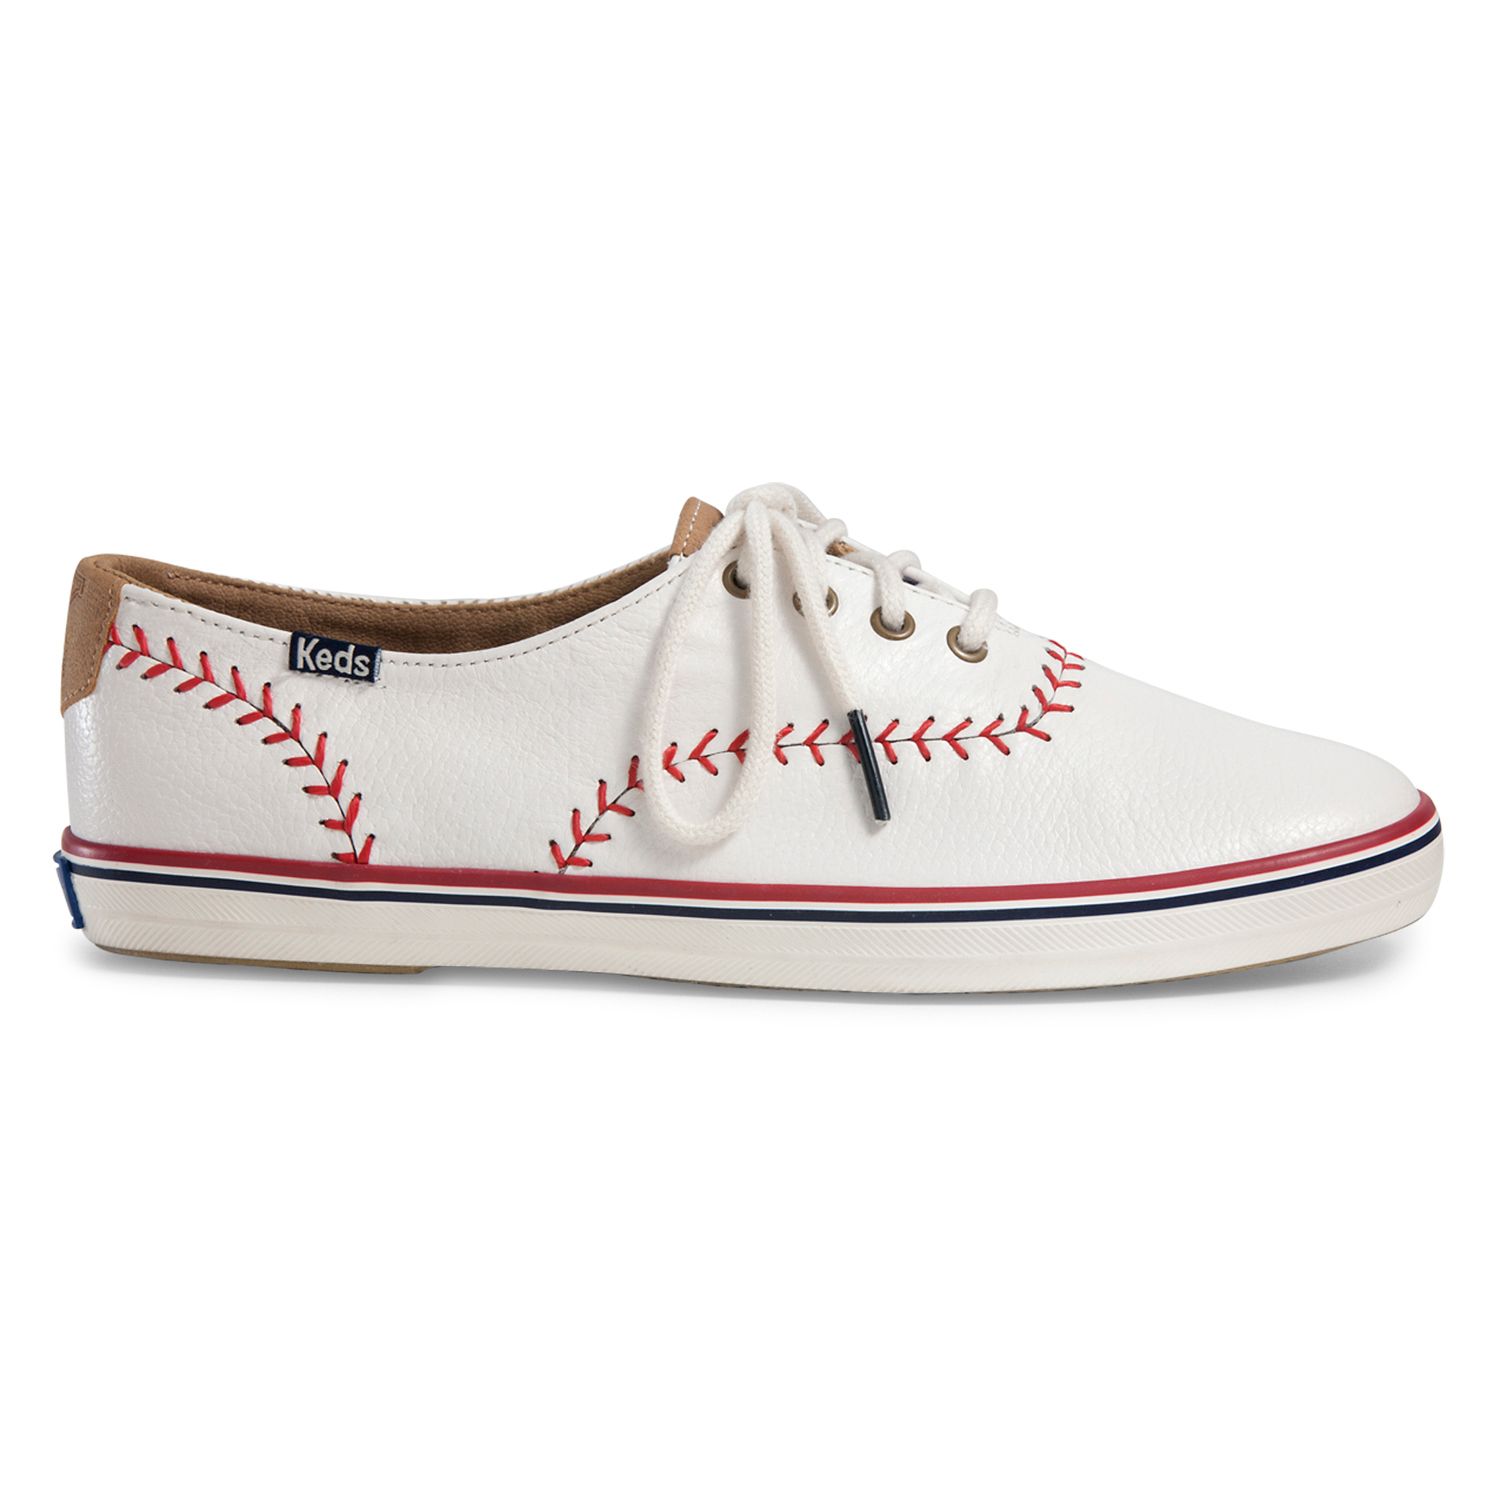 Keds Champion Pennant Women's Leather Shoes